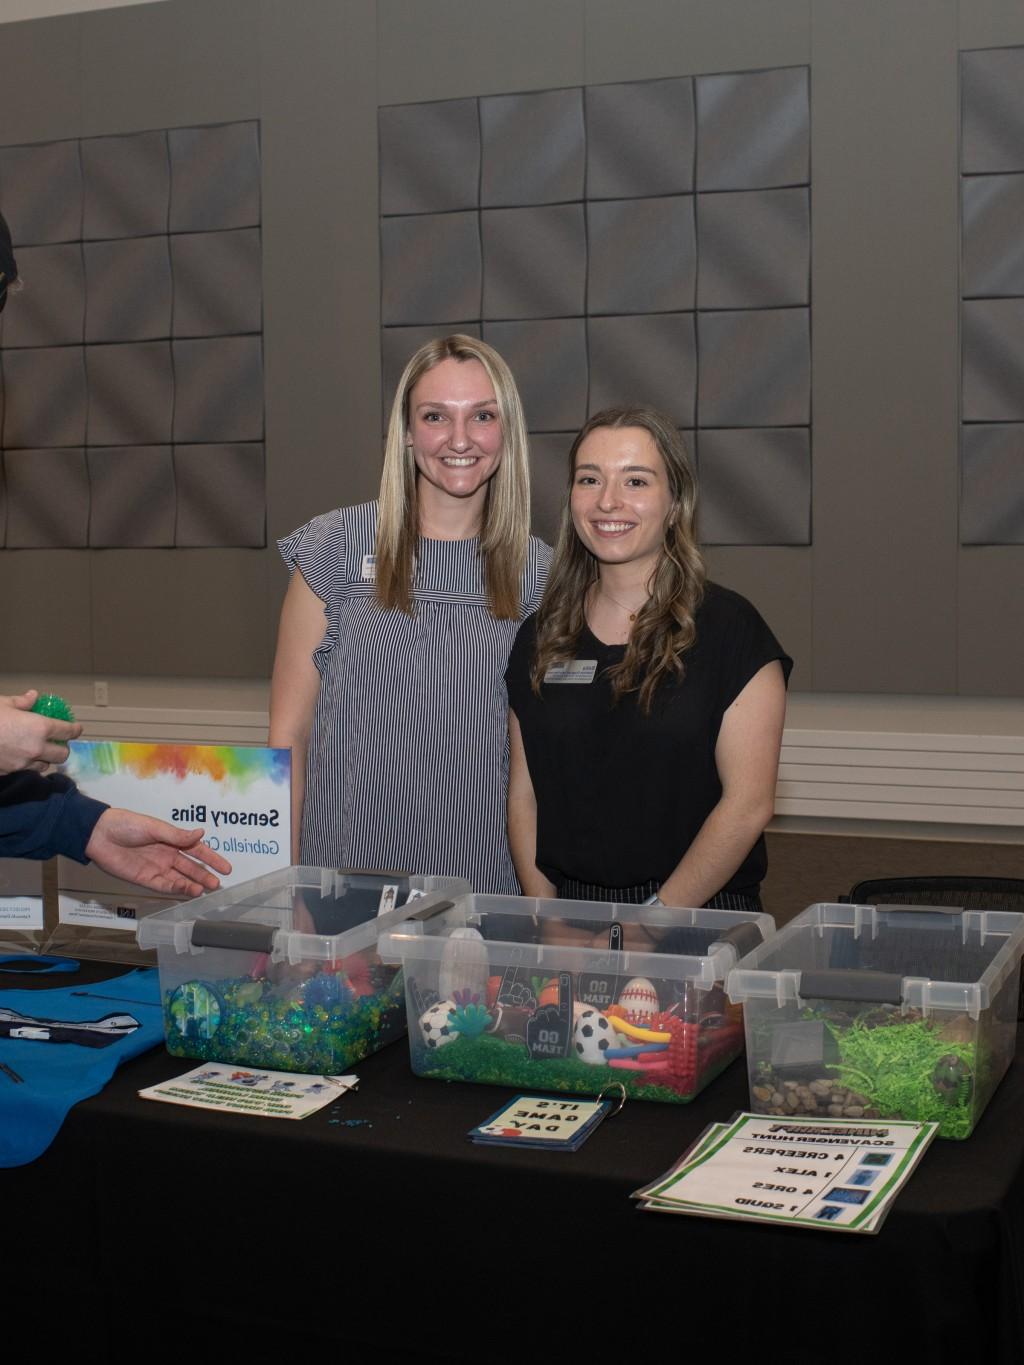 Two female students pose in front of their project, sensory bins